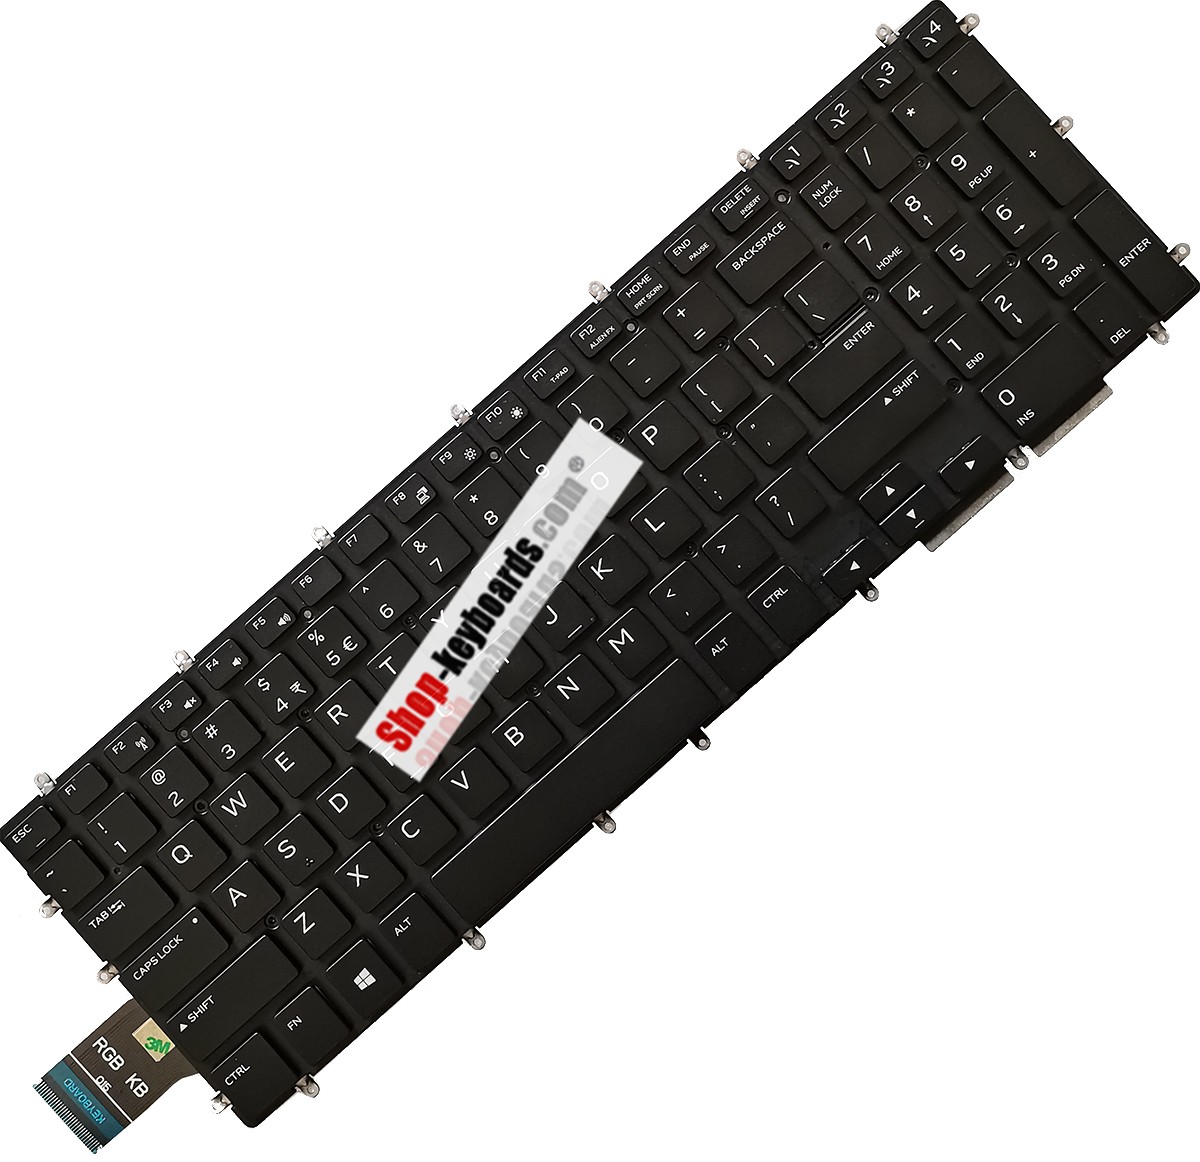 Dell 0KN4-0D1ND16 Keyboard replacement